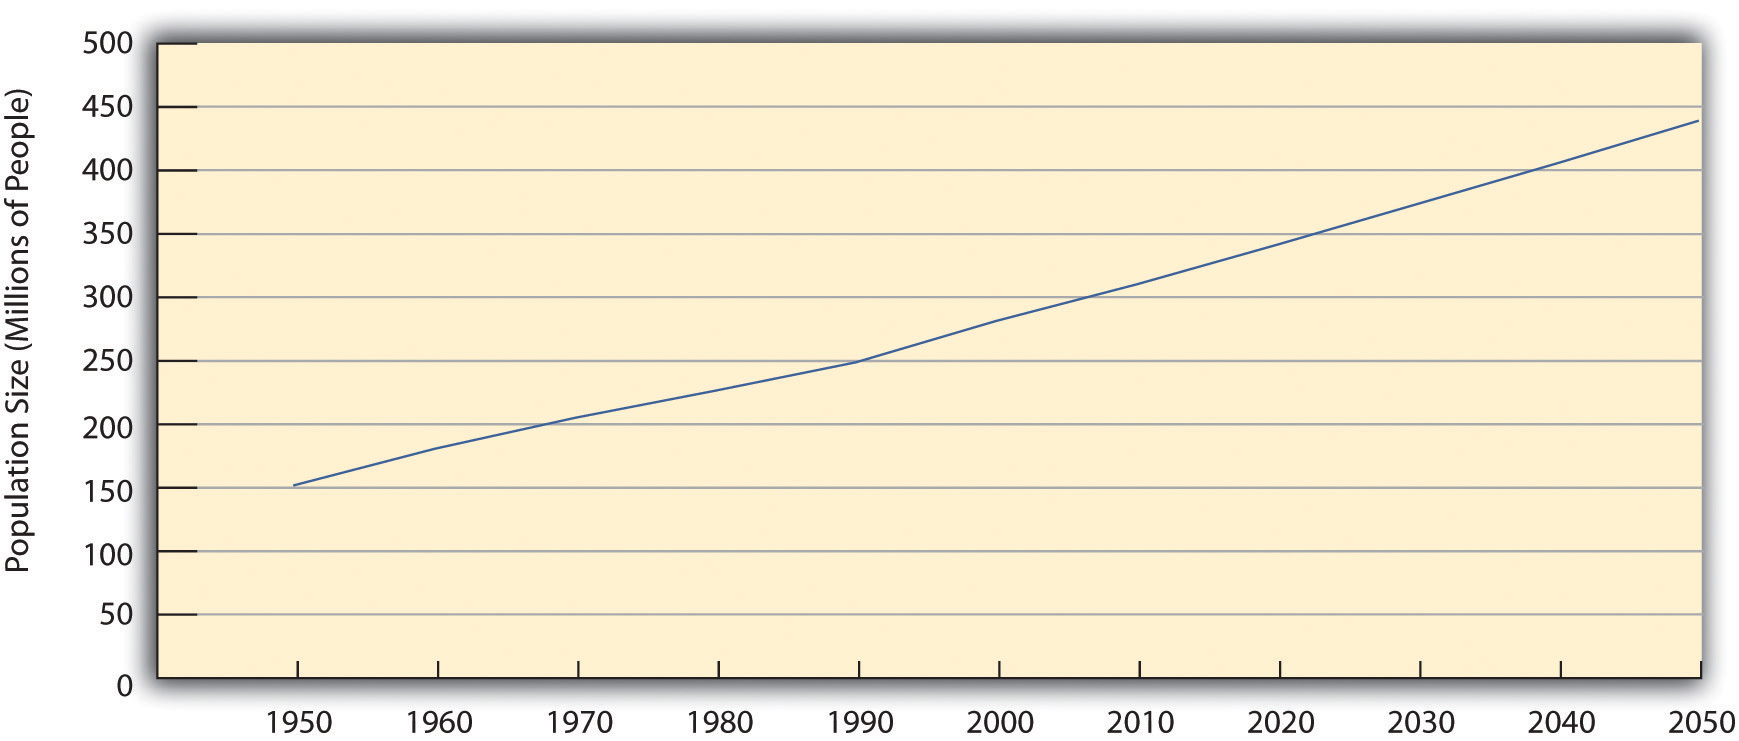 This chart shows that the current U.S. population is more than 330 million, the population of the U.S. is projected to exceed 400 million before 2050.